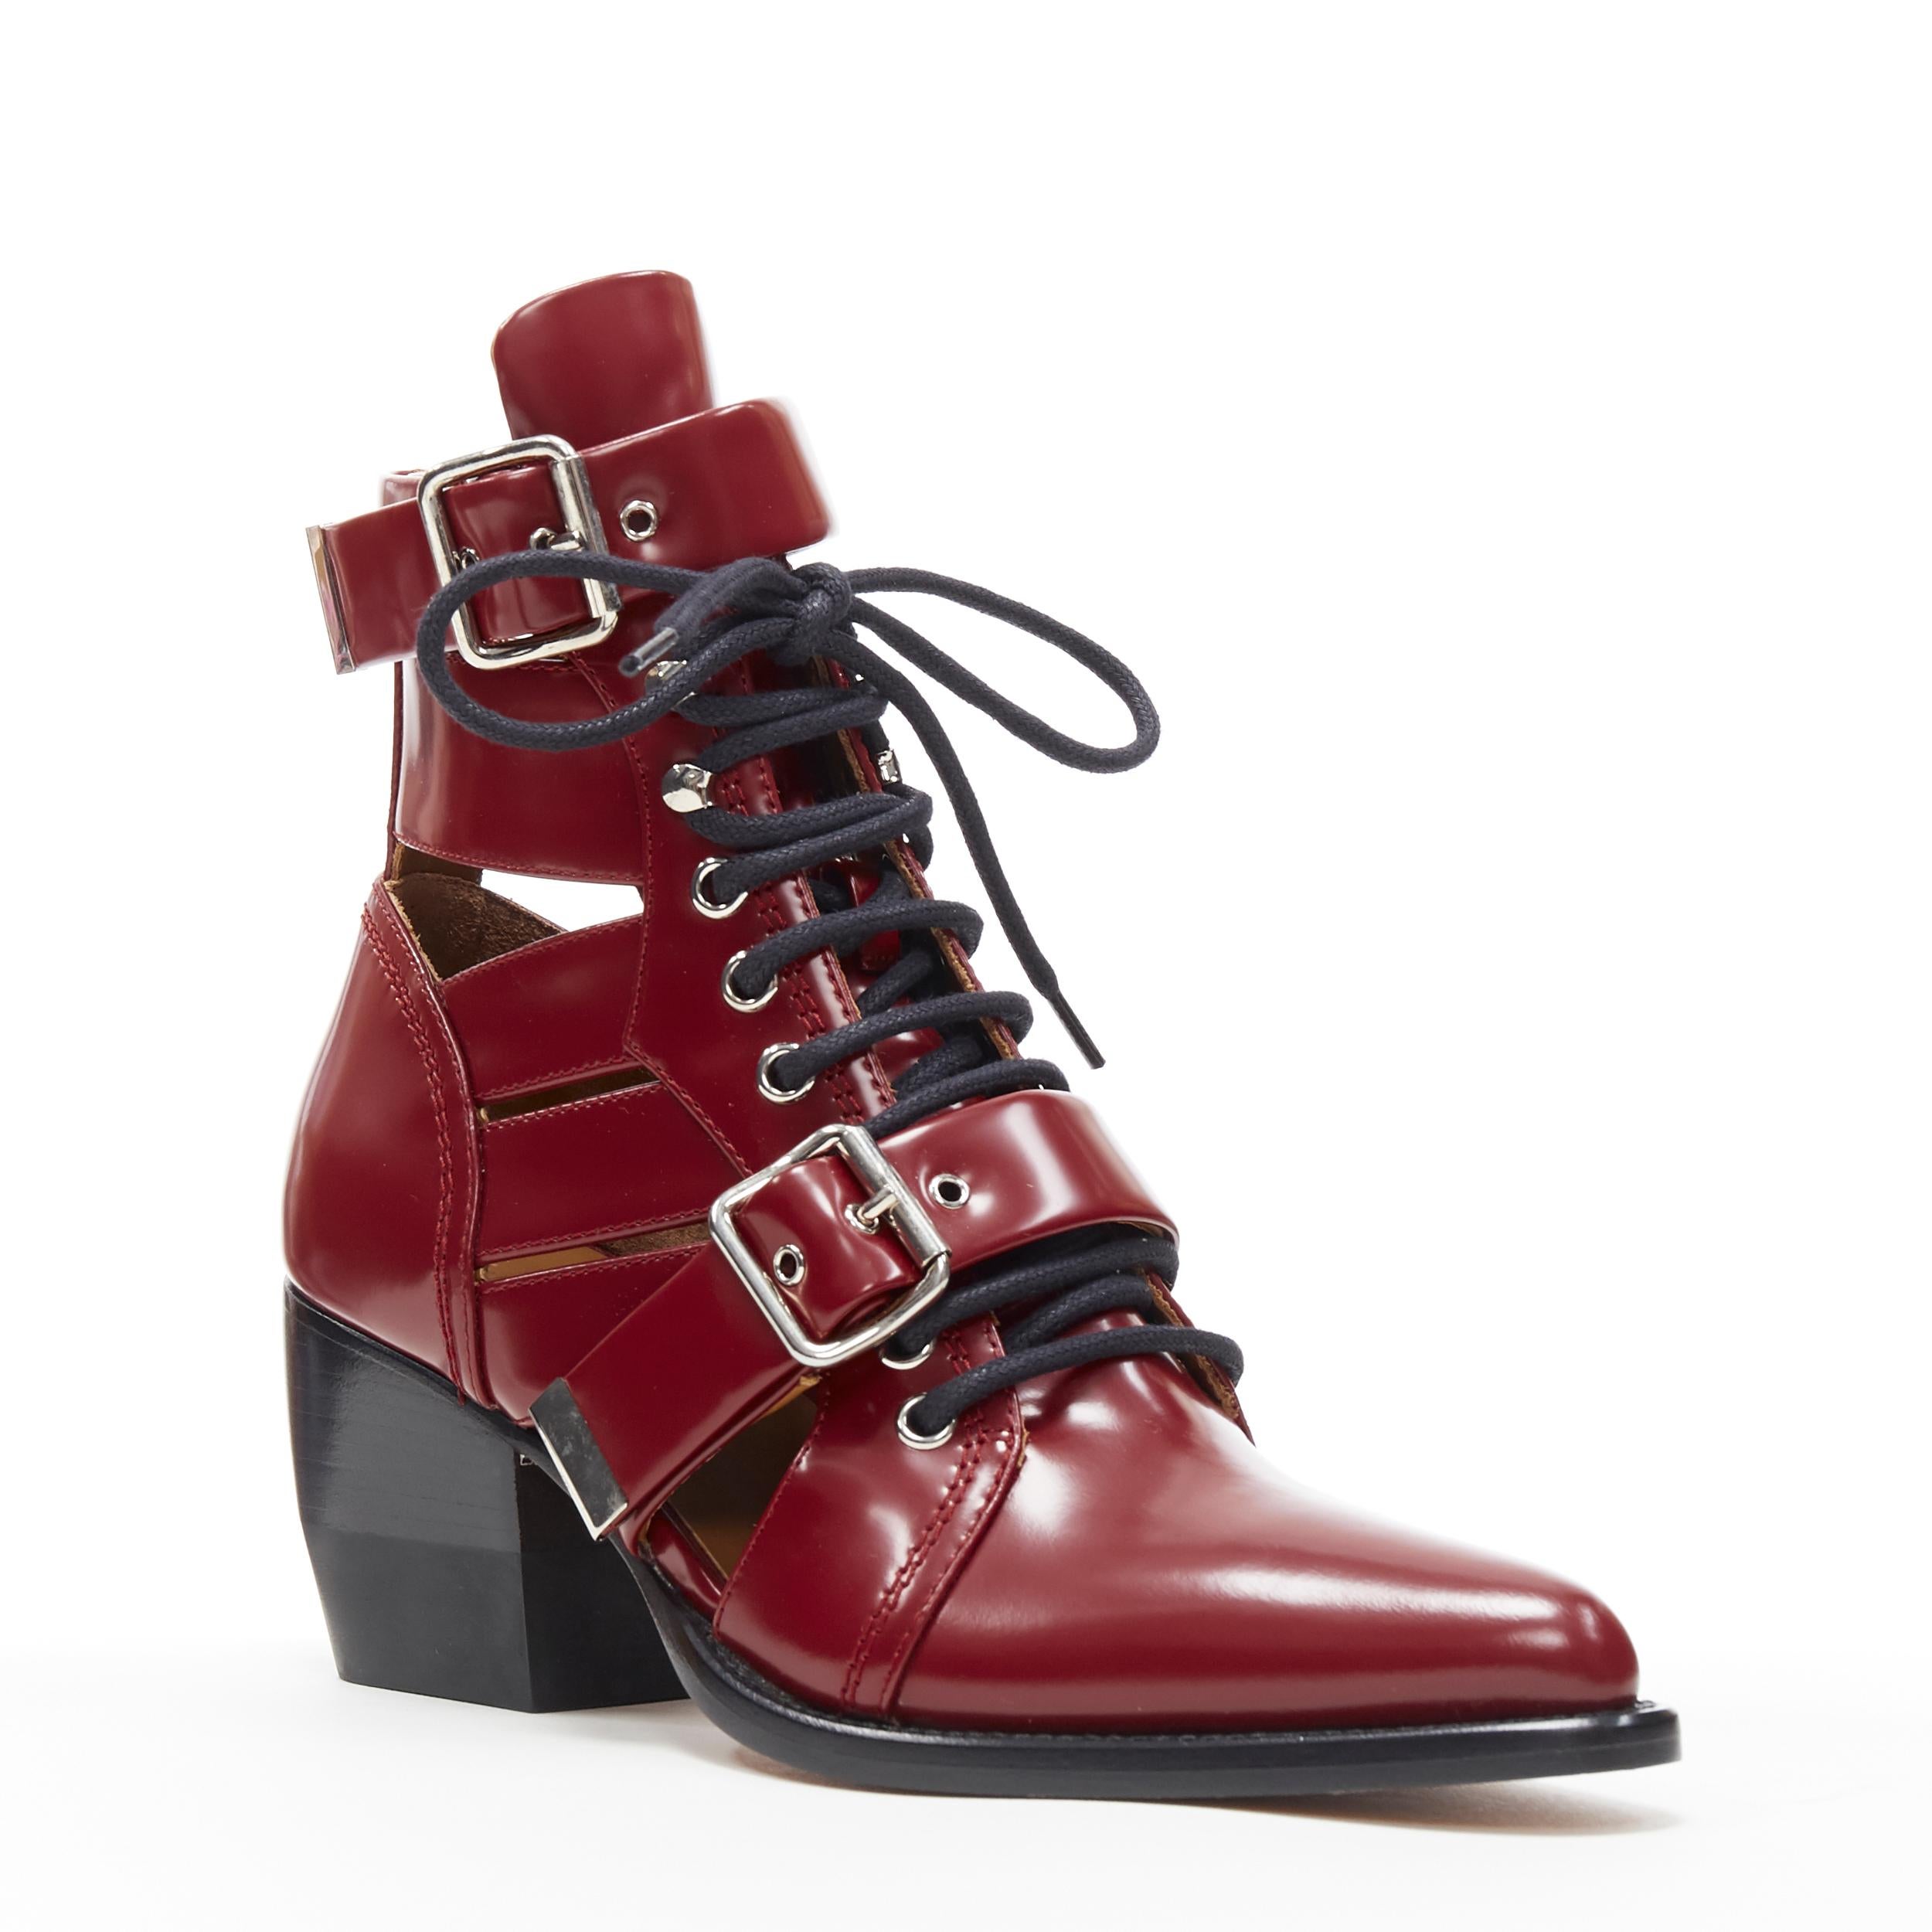 new CHLOE Rylee burgundy red leather cut out buckled pointy ankle boot EU36.5
Brand: Chloe
Model Name / Style: Rylee
Material: Leather
Color: Burgundy
Pattern: Solid
Closure: Lace up
Extra Detail: Signature Rylee boots by Chloe. Runway style. Ankle